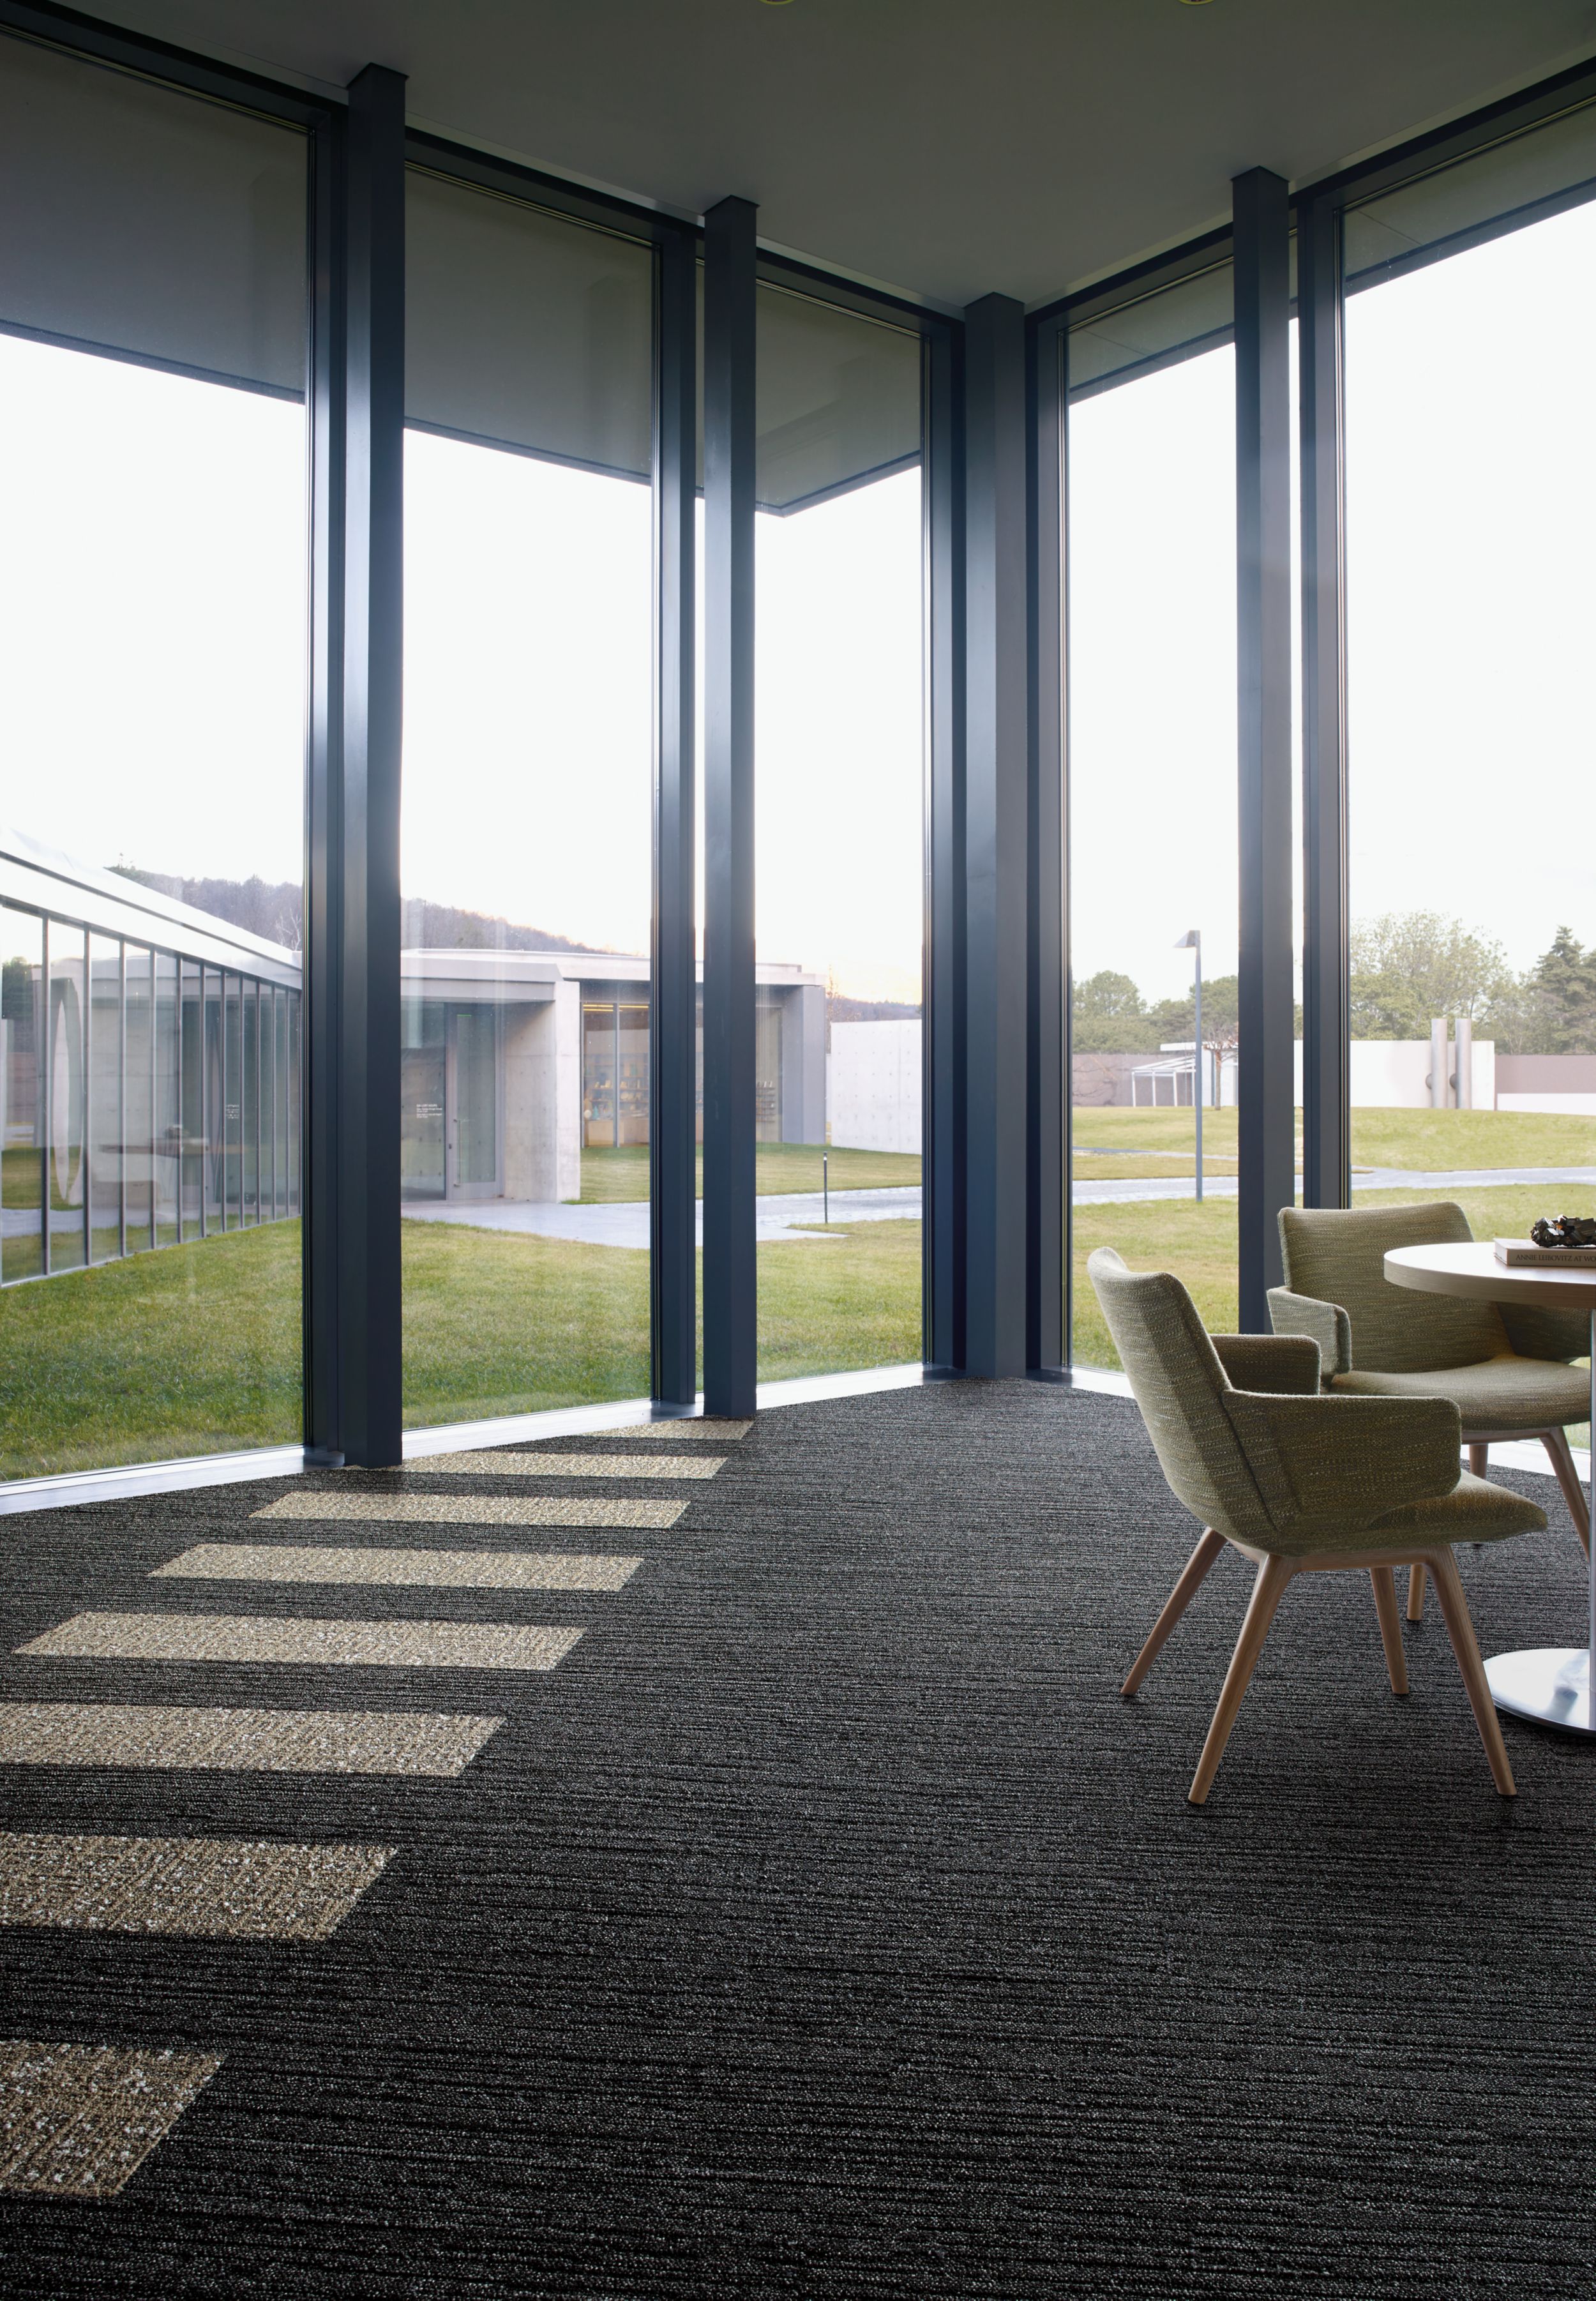 Stitch In Time: World Woven Collection Carpet Tile by Interface